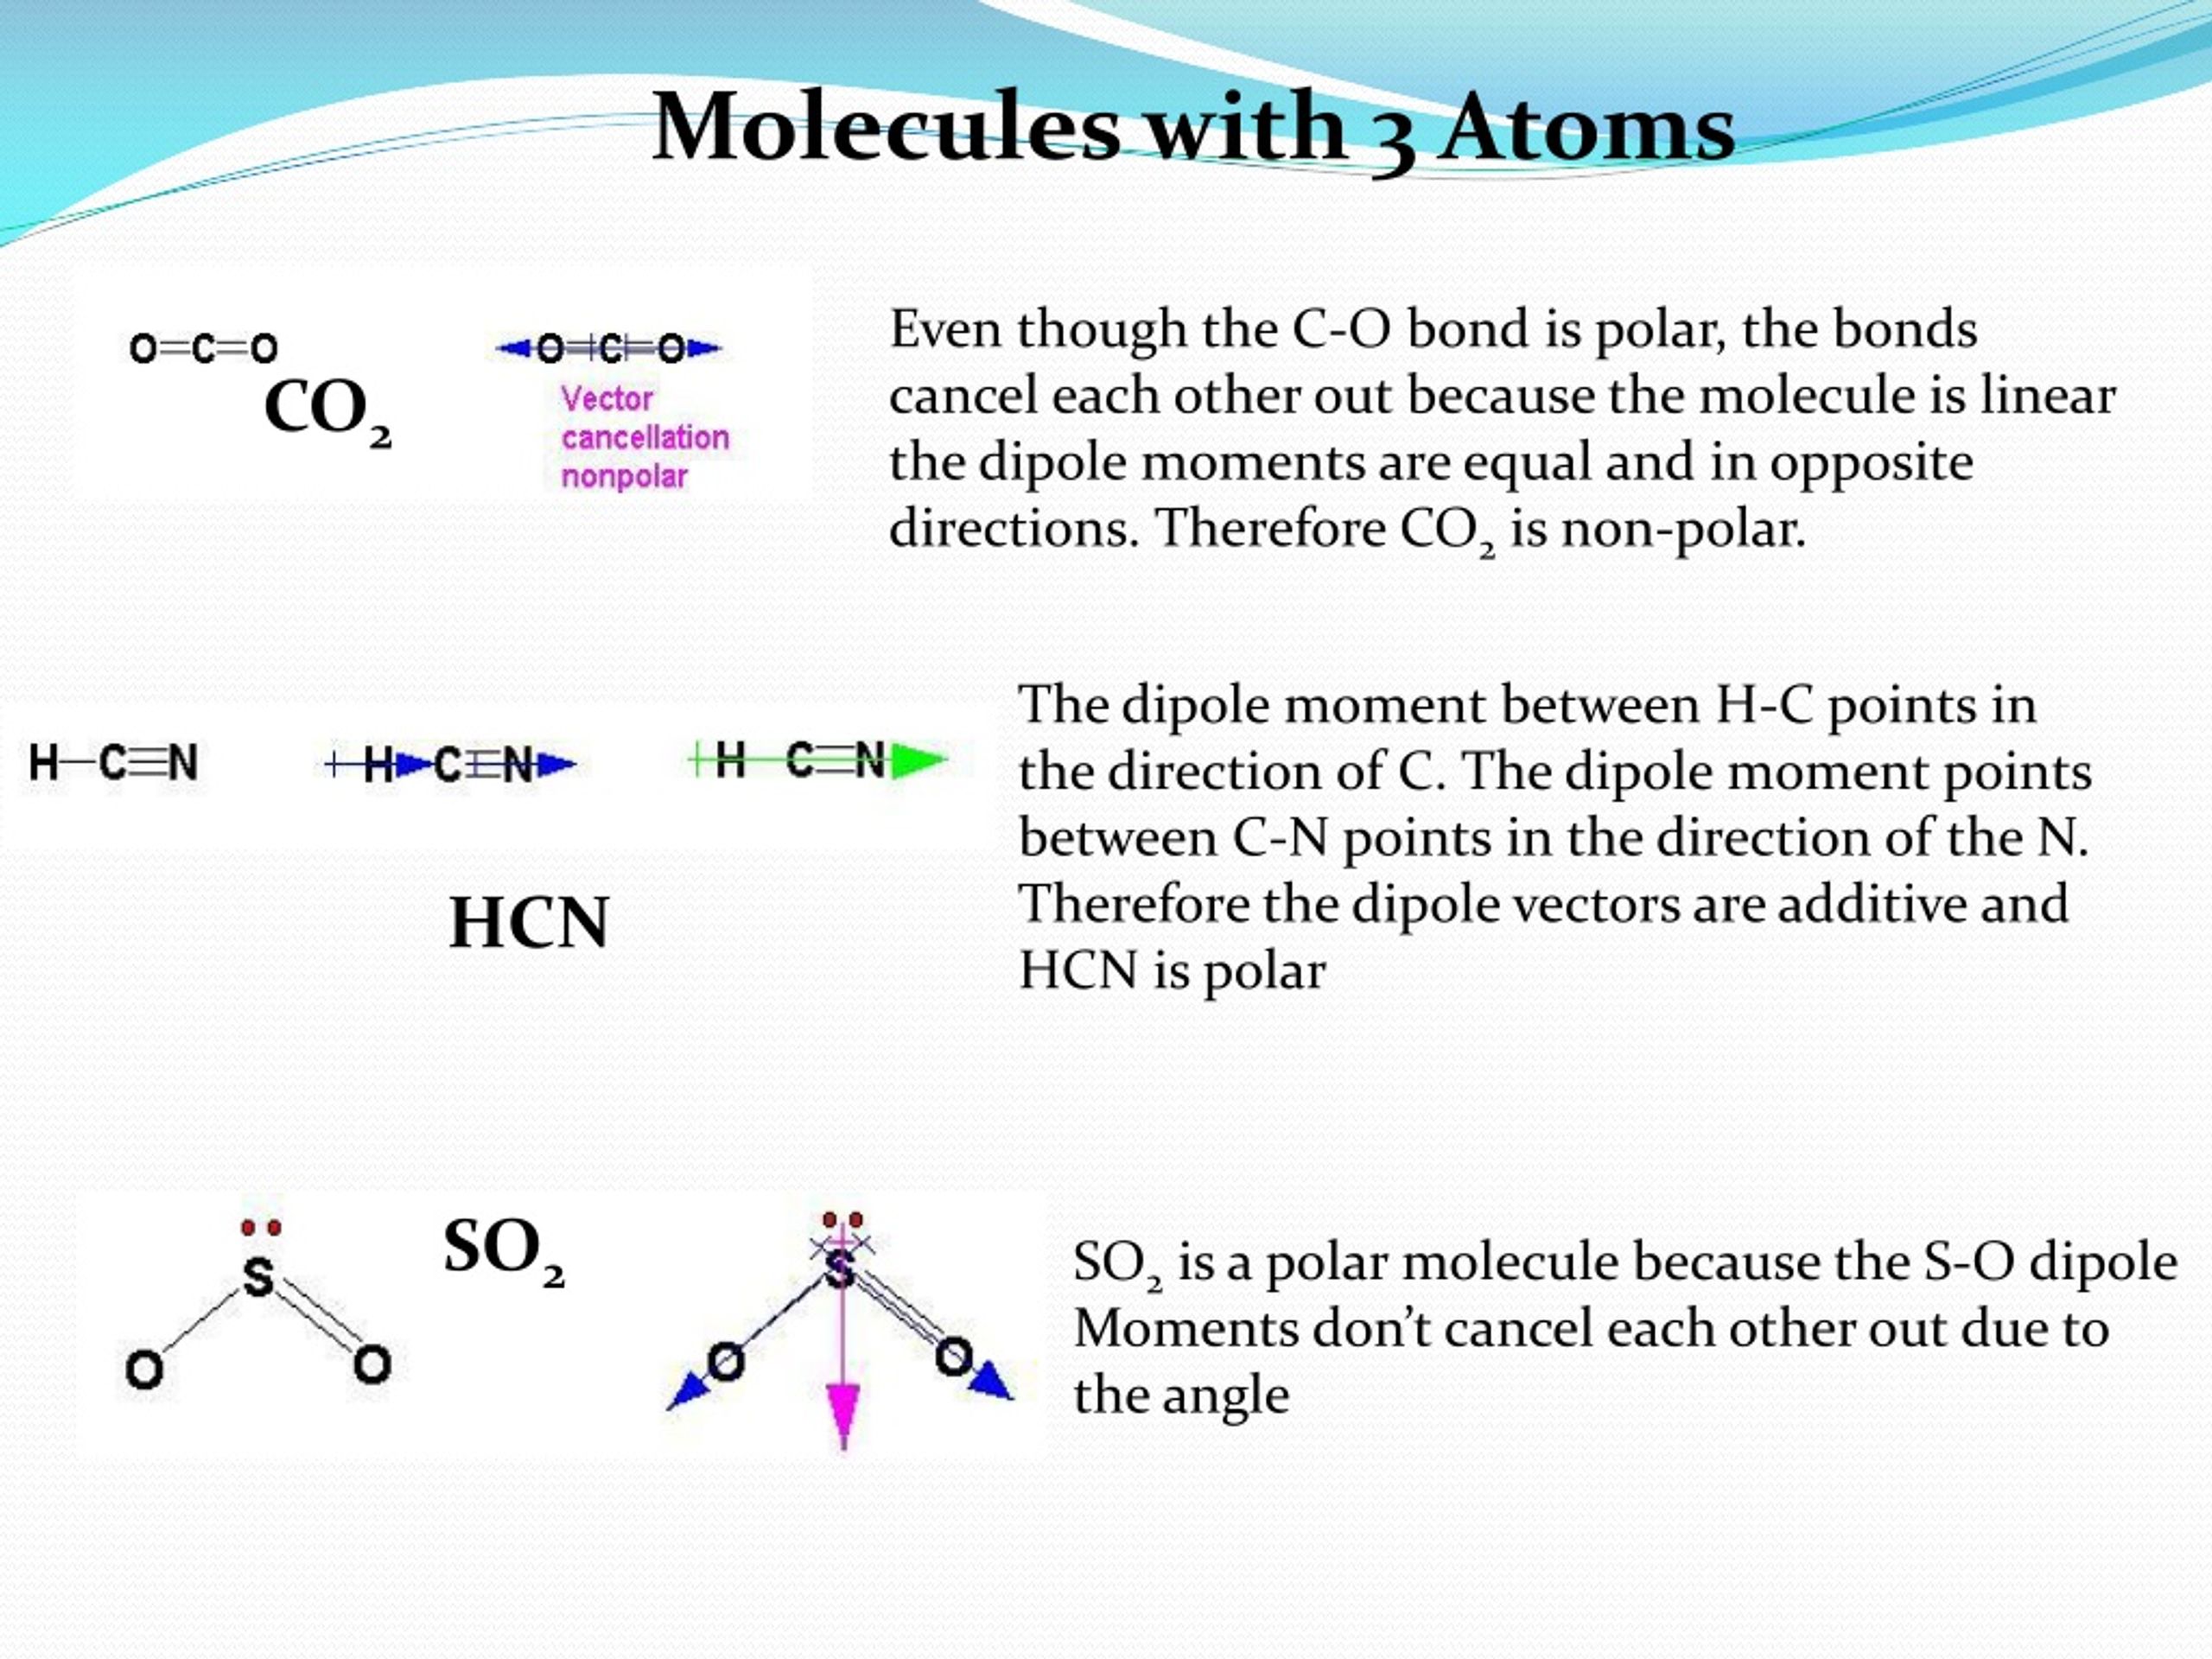 molecules with 3 atoms.